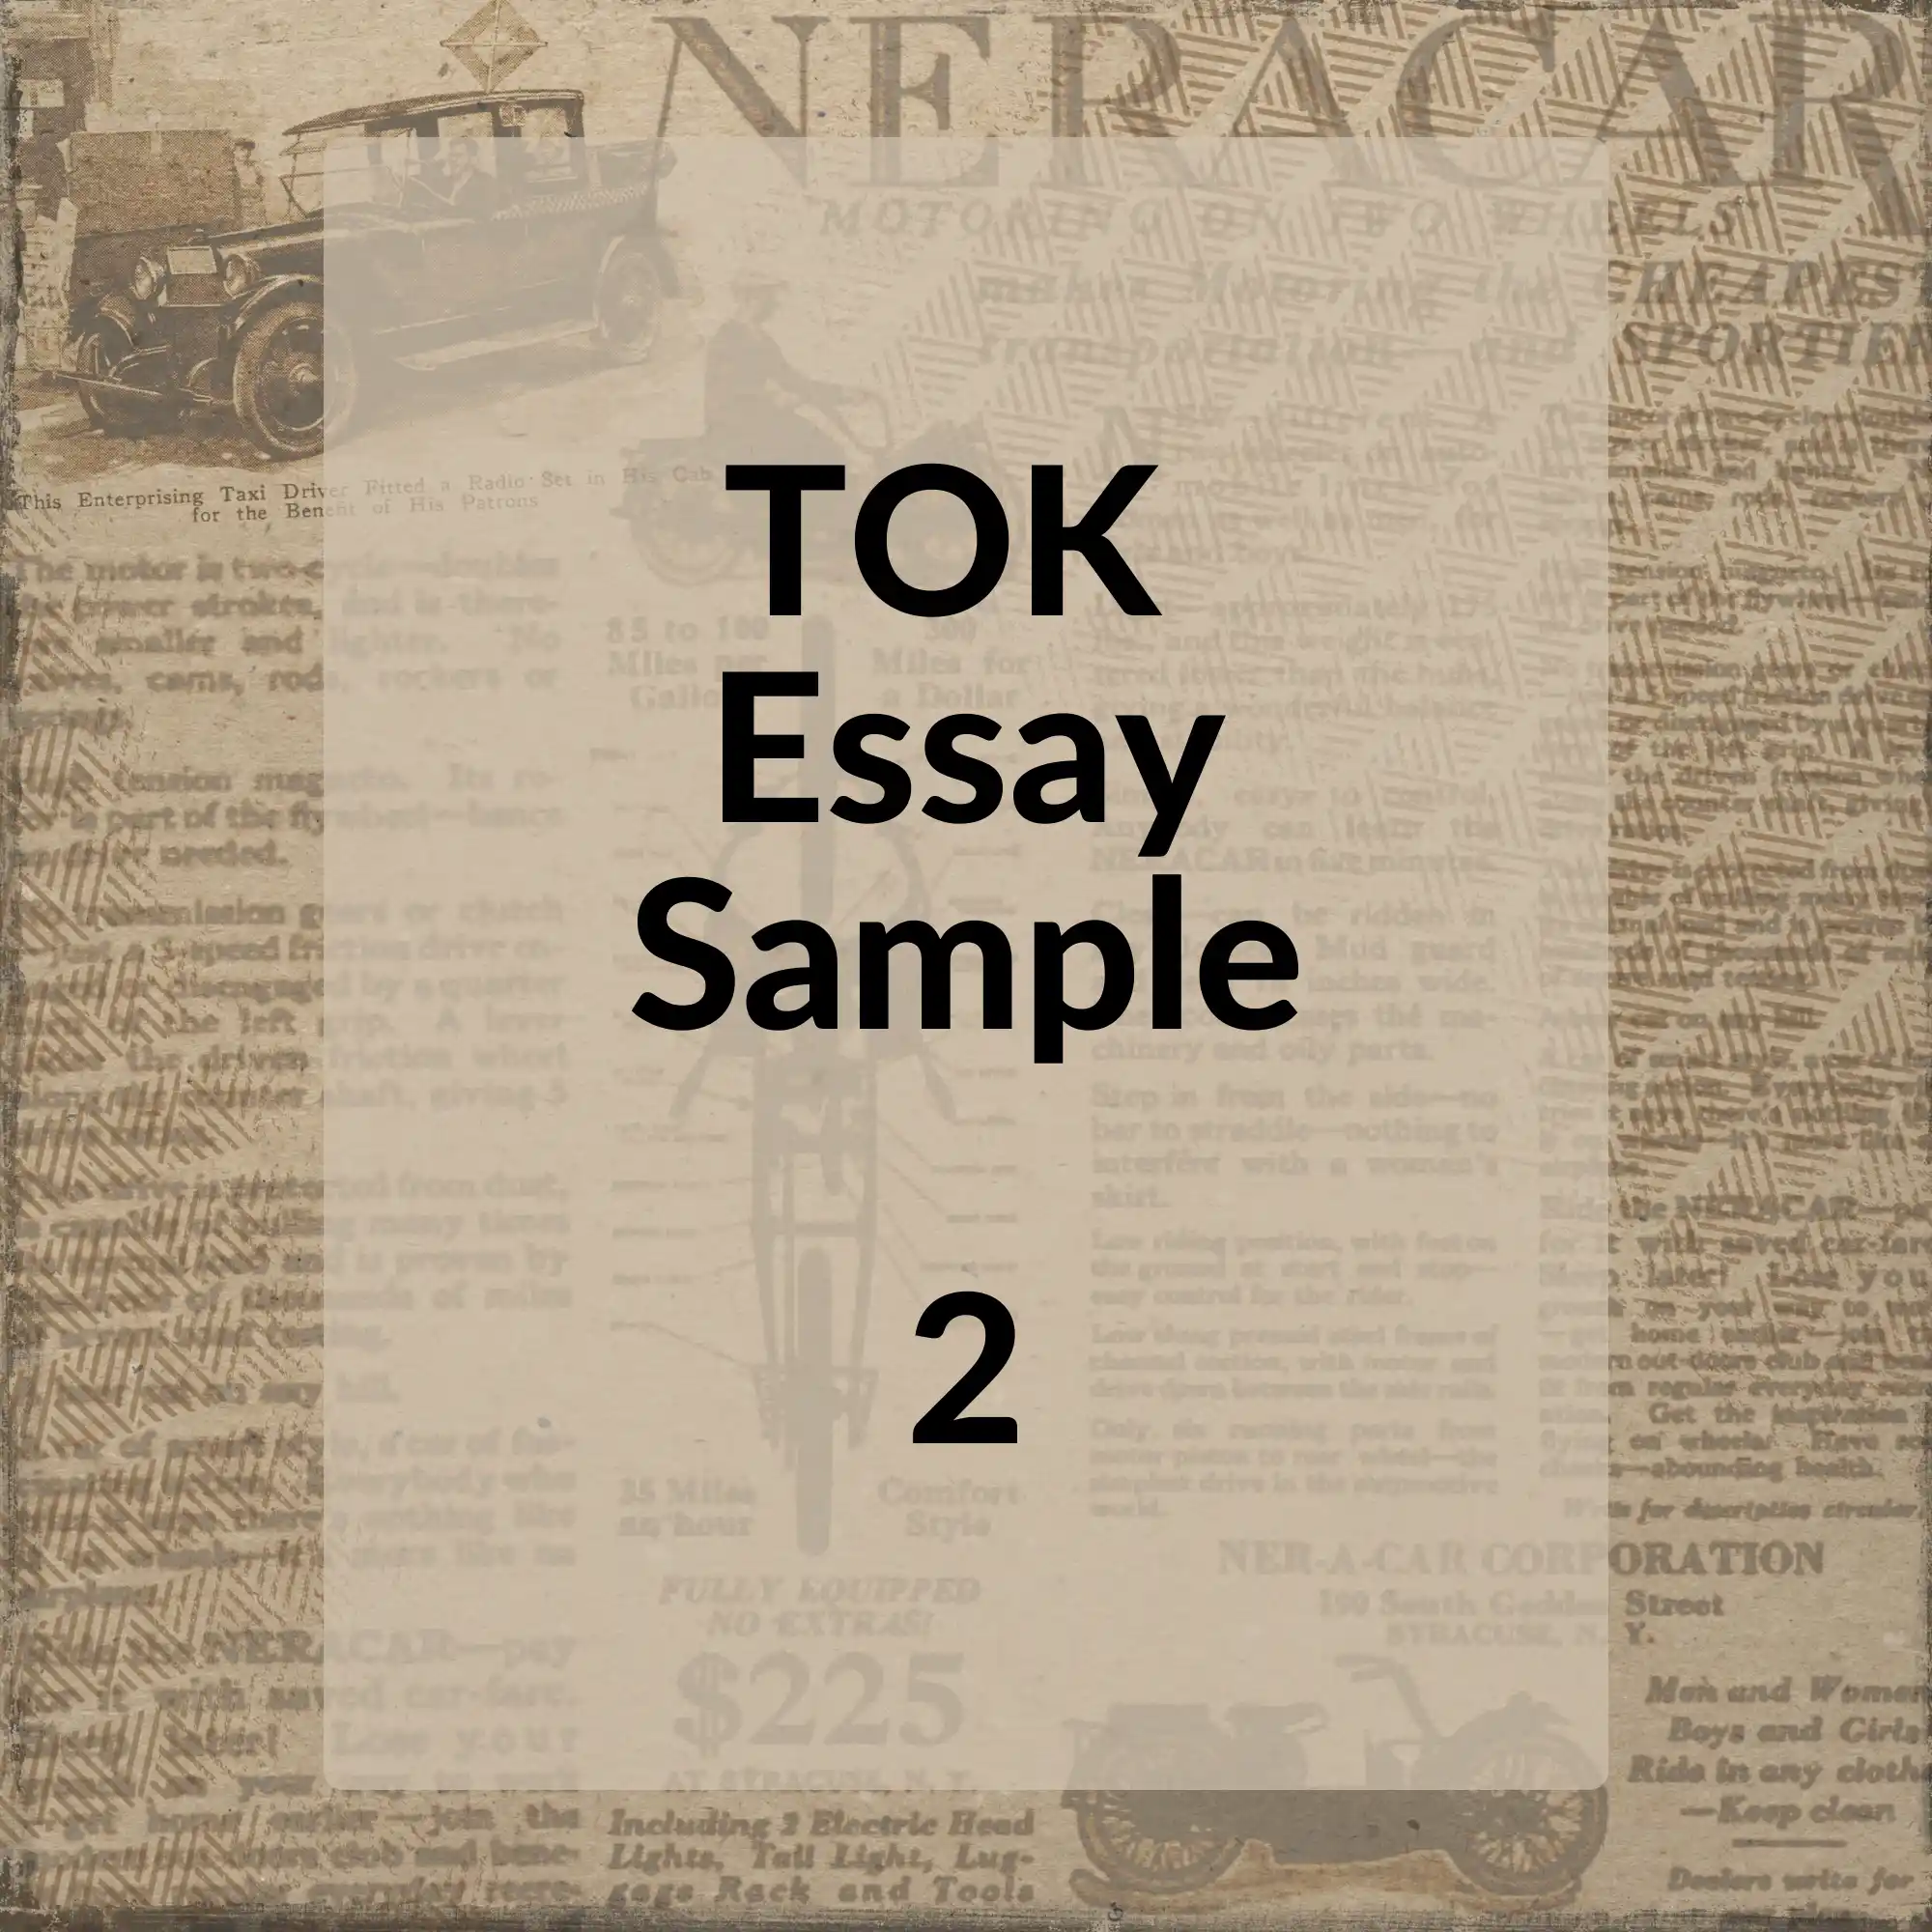 A square image with a vintage newspaper background, featuring a black rectangle with the words "TOK Essay Sample 2" in white font and the number "2" prominently displayed at the bottom.